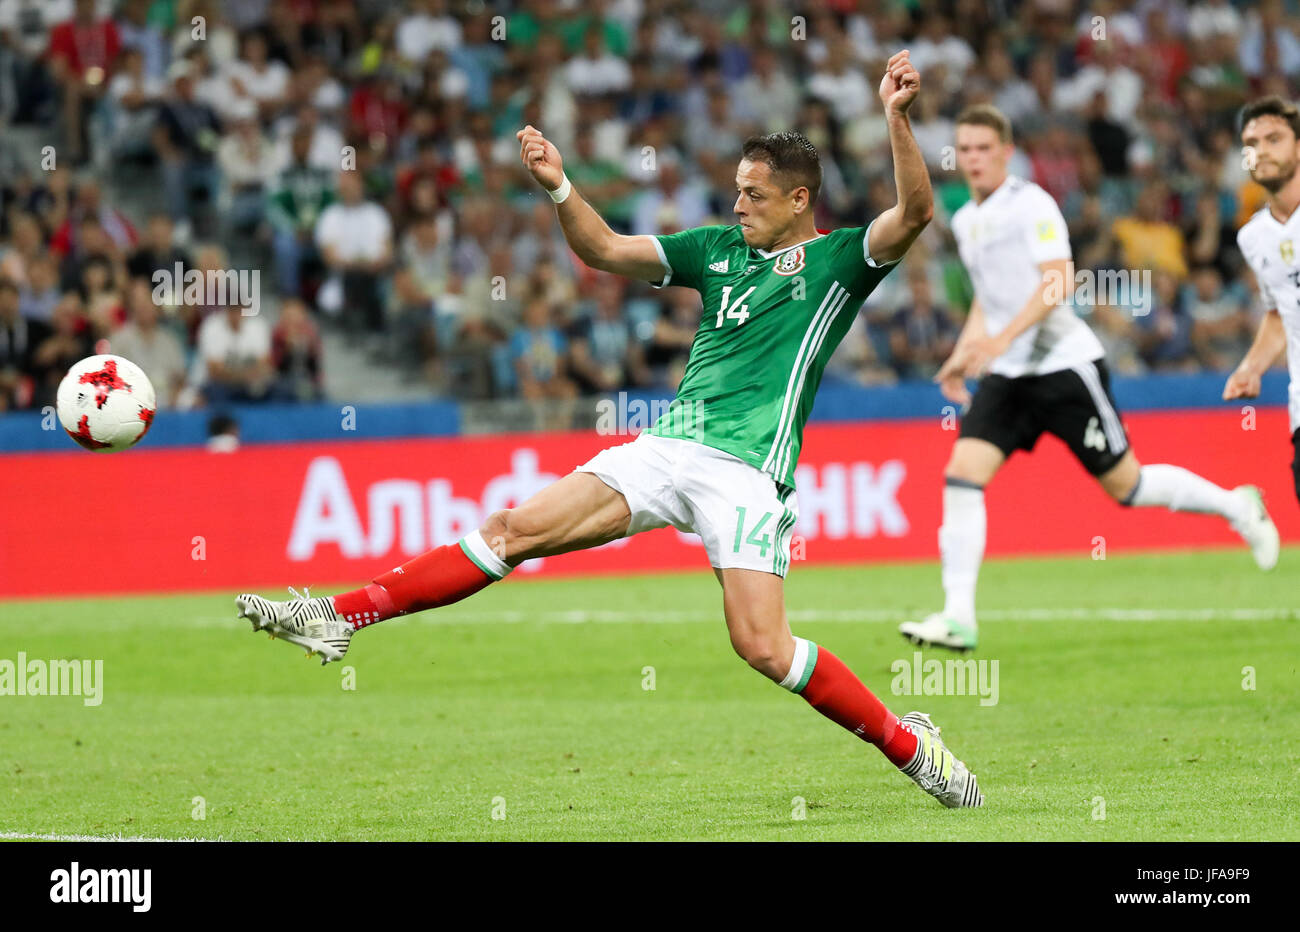 Sochi, Russia. 29th June, 2017. Javier Hernandez (front) of Mexico shoots for a goal during the semifinal match of the 2017 FIFA Confederations Cup against Germany in Sochi, Russia, June 29, 2017. Mexico lost 1-4. Credit: Xu Zijian/Xinhua/Alamy Live News Stock Photo